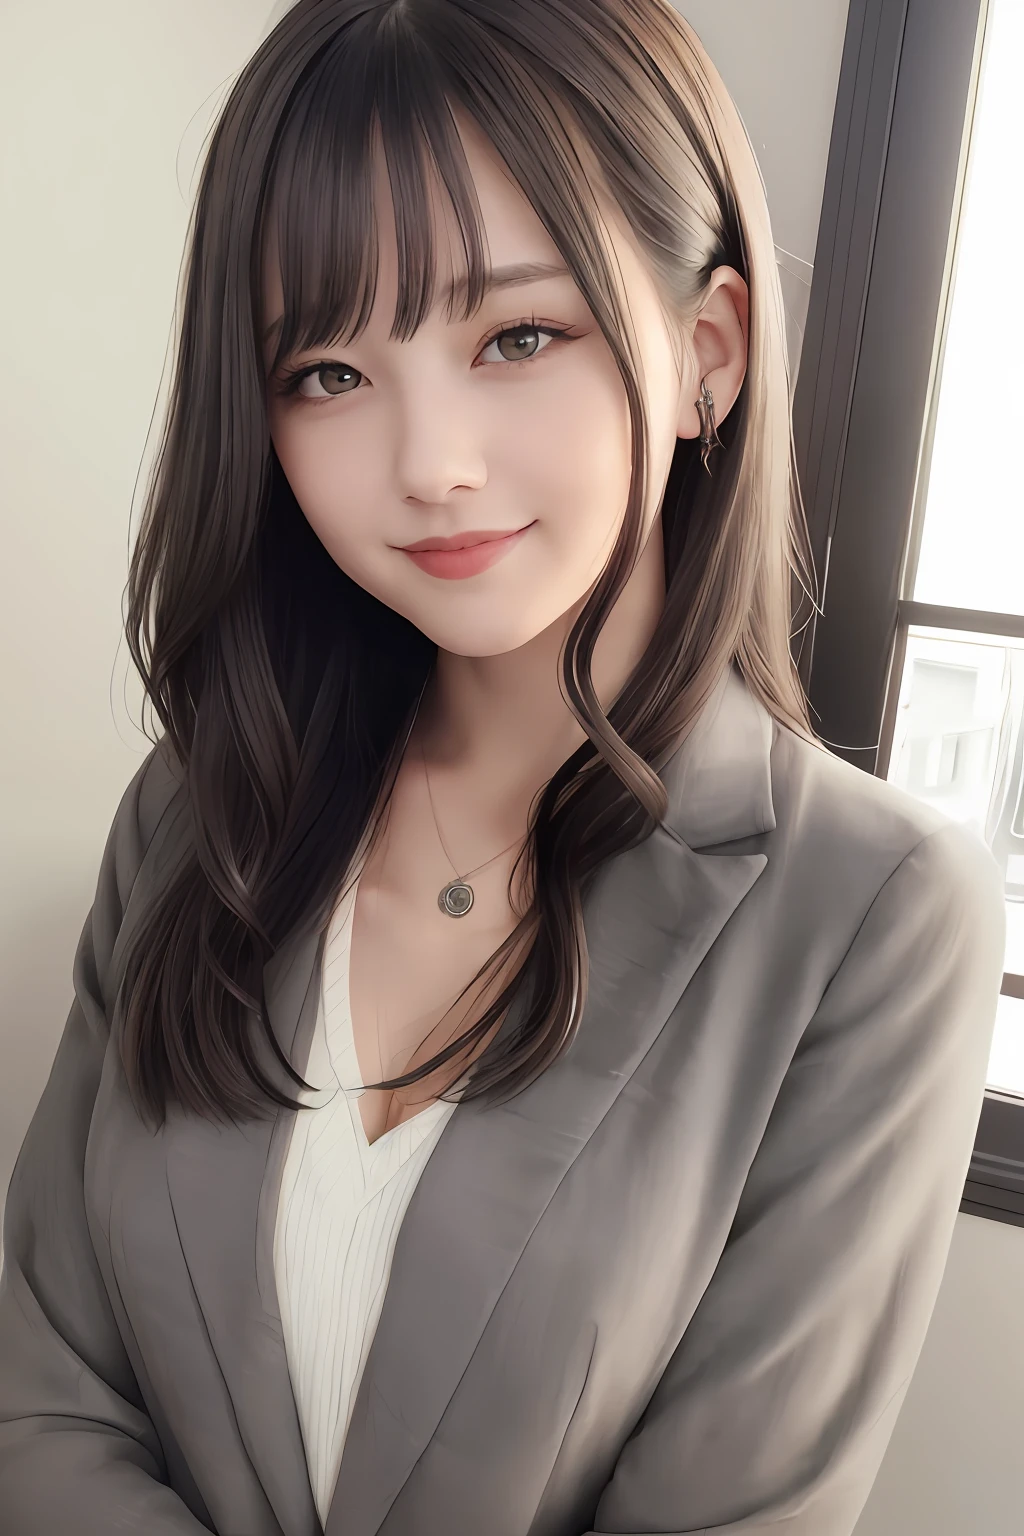 Gray suit、Little Gal、Clear skin、long、Sexy face、Small pendant、perfectly proportions、inside in room、a gorgeous、s lips、A dark-haired、ciinematic light、High Definition 8K、Real Estate Girls、23-year-old woman、adult-like、A dark-haired、Curly hair、natural、Realism、Grain、Calm smile